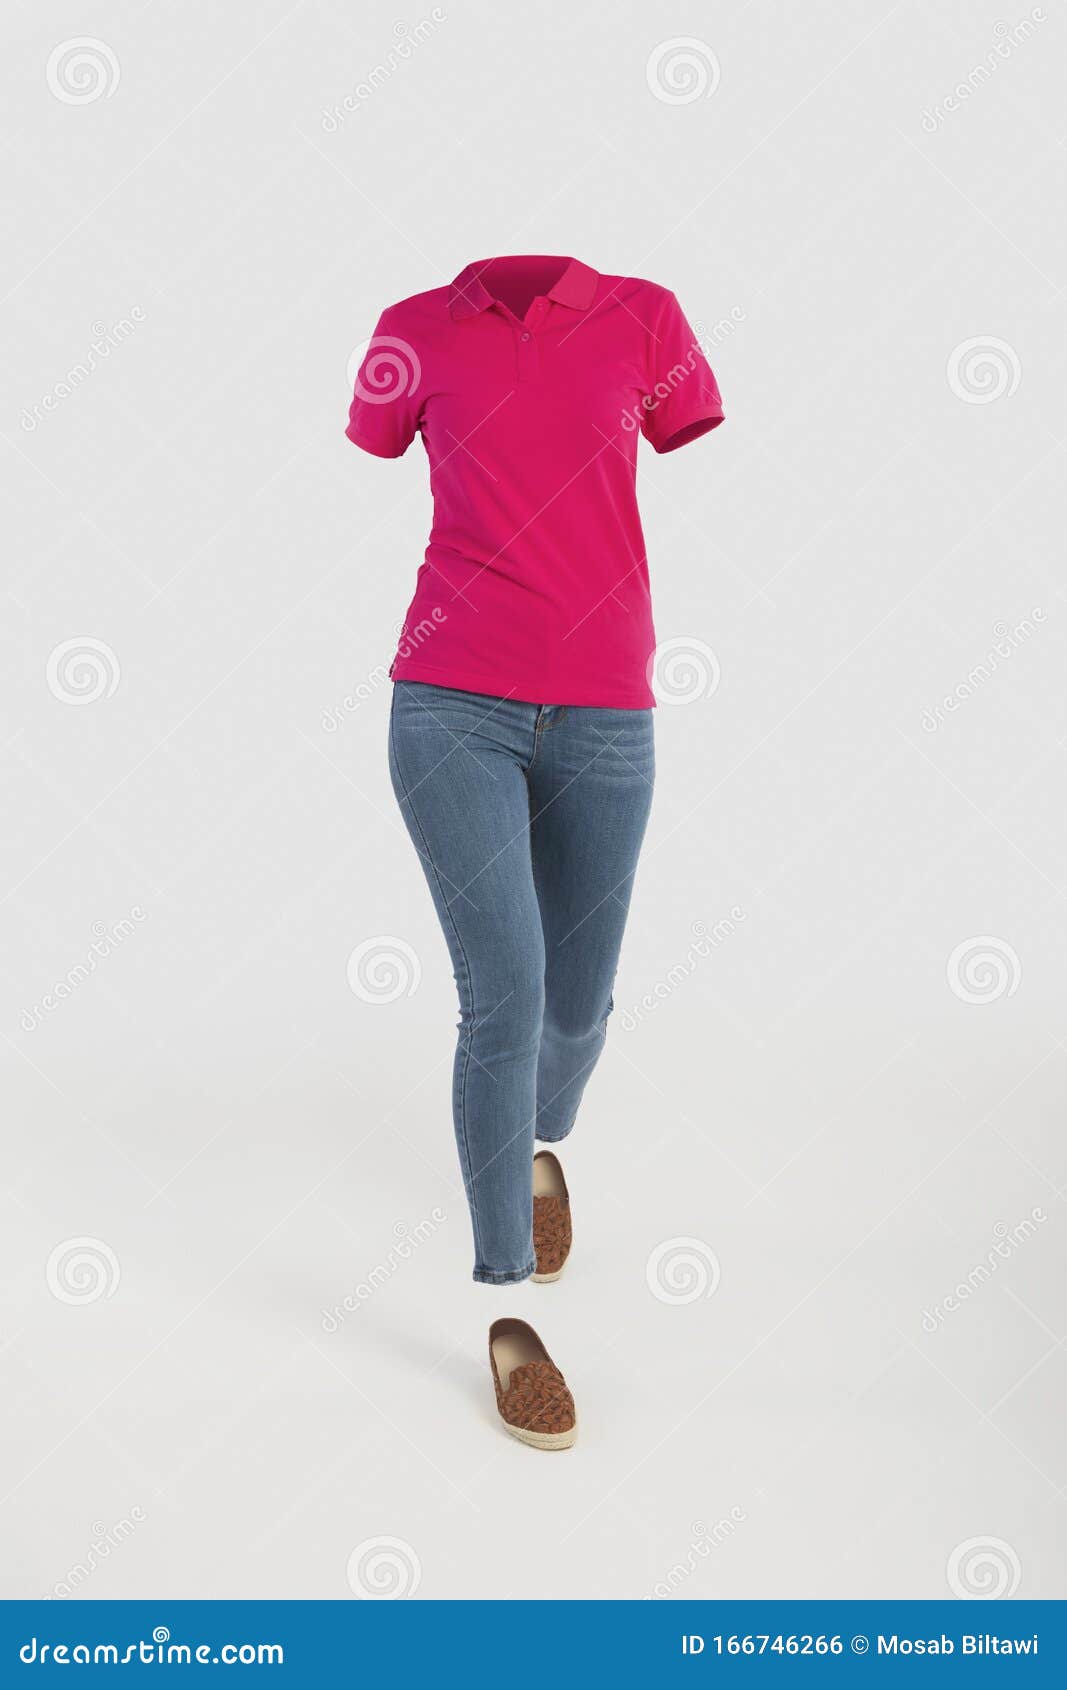 syndroom Decoratief Spruit Empty Clothes Invisible Woman Wearing Pink Polo Shirt and Tight Jeans with  Shoes Posing Stock Photo - Image of clothing, concept: 166746266